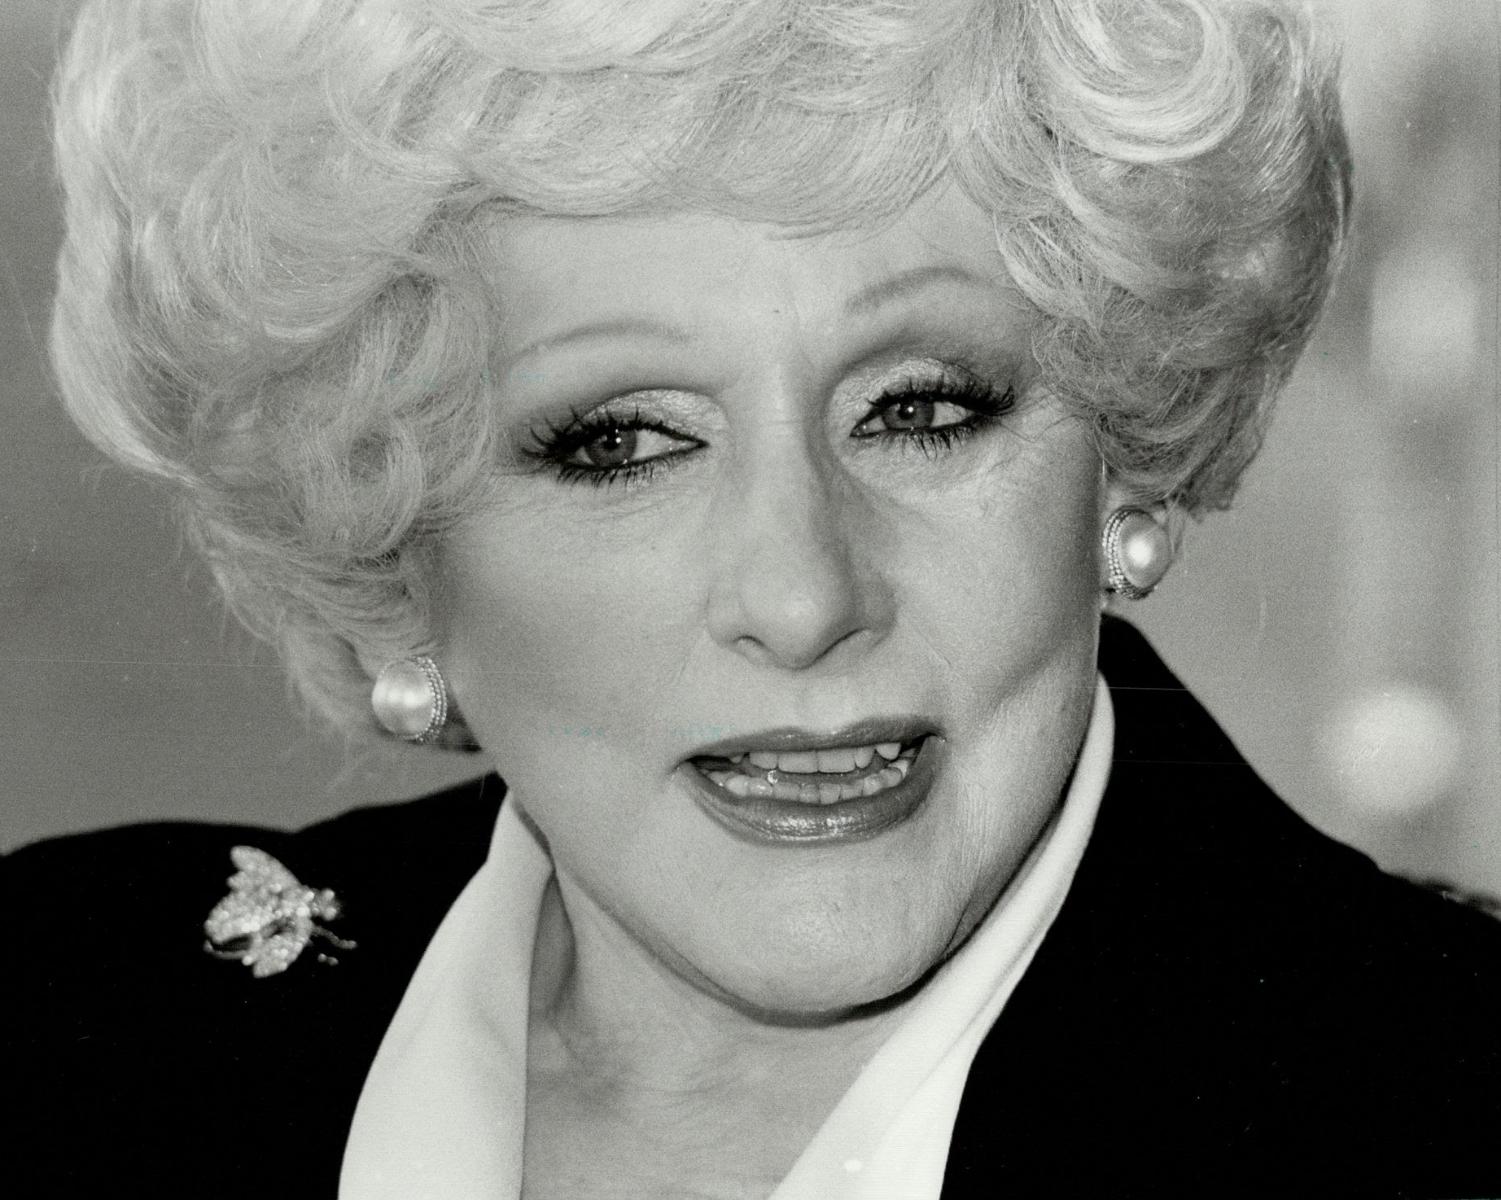 MARY KAY ASH, AMERICAN BUSINESSWOMAN